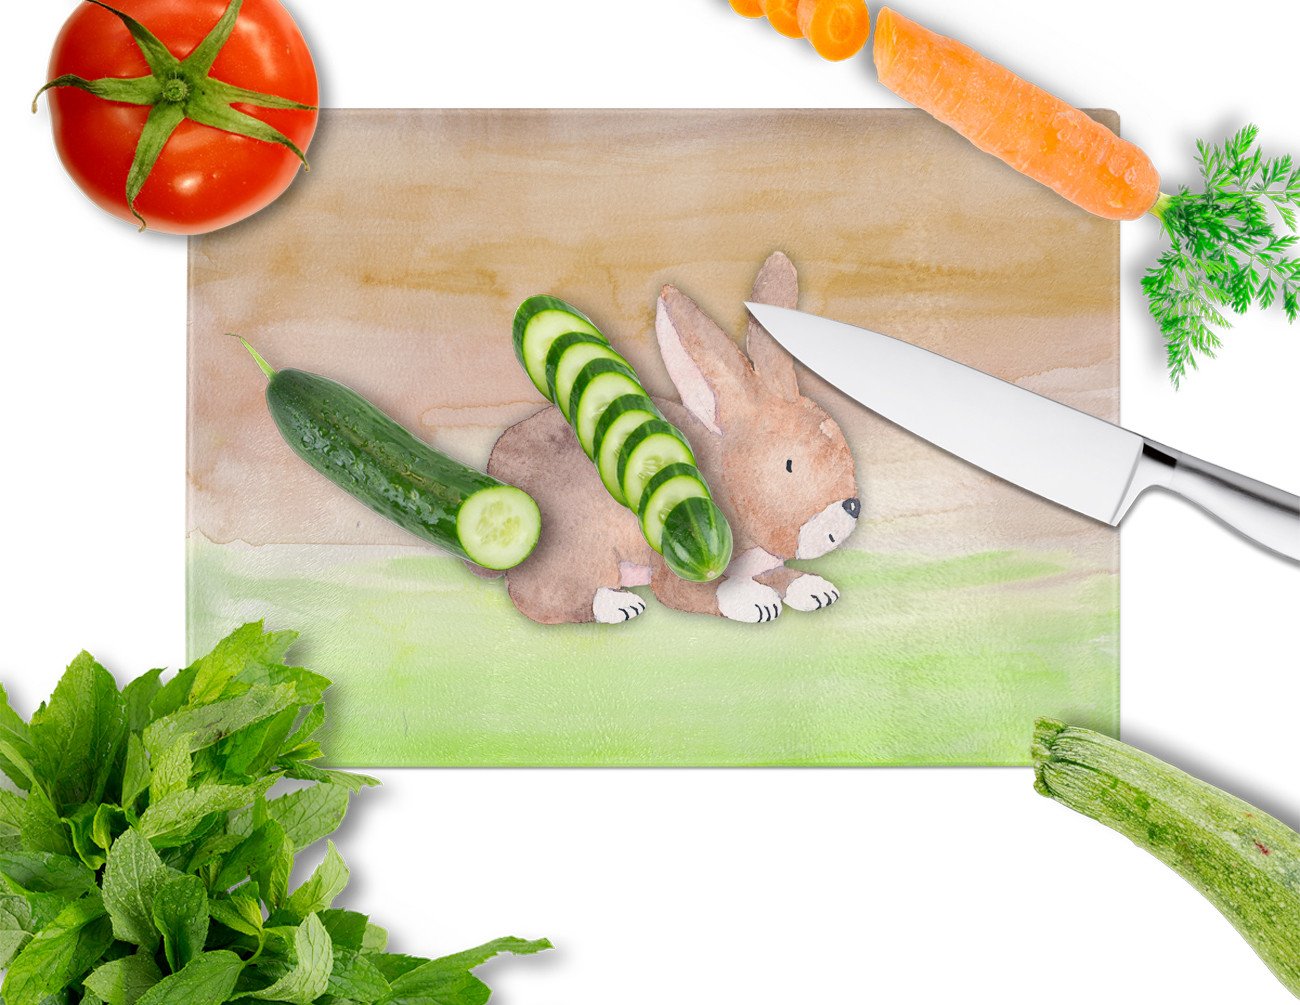 Rabbit Watercolor Glass Cutting Board Large BB7410LCB by Caroline's Treasures